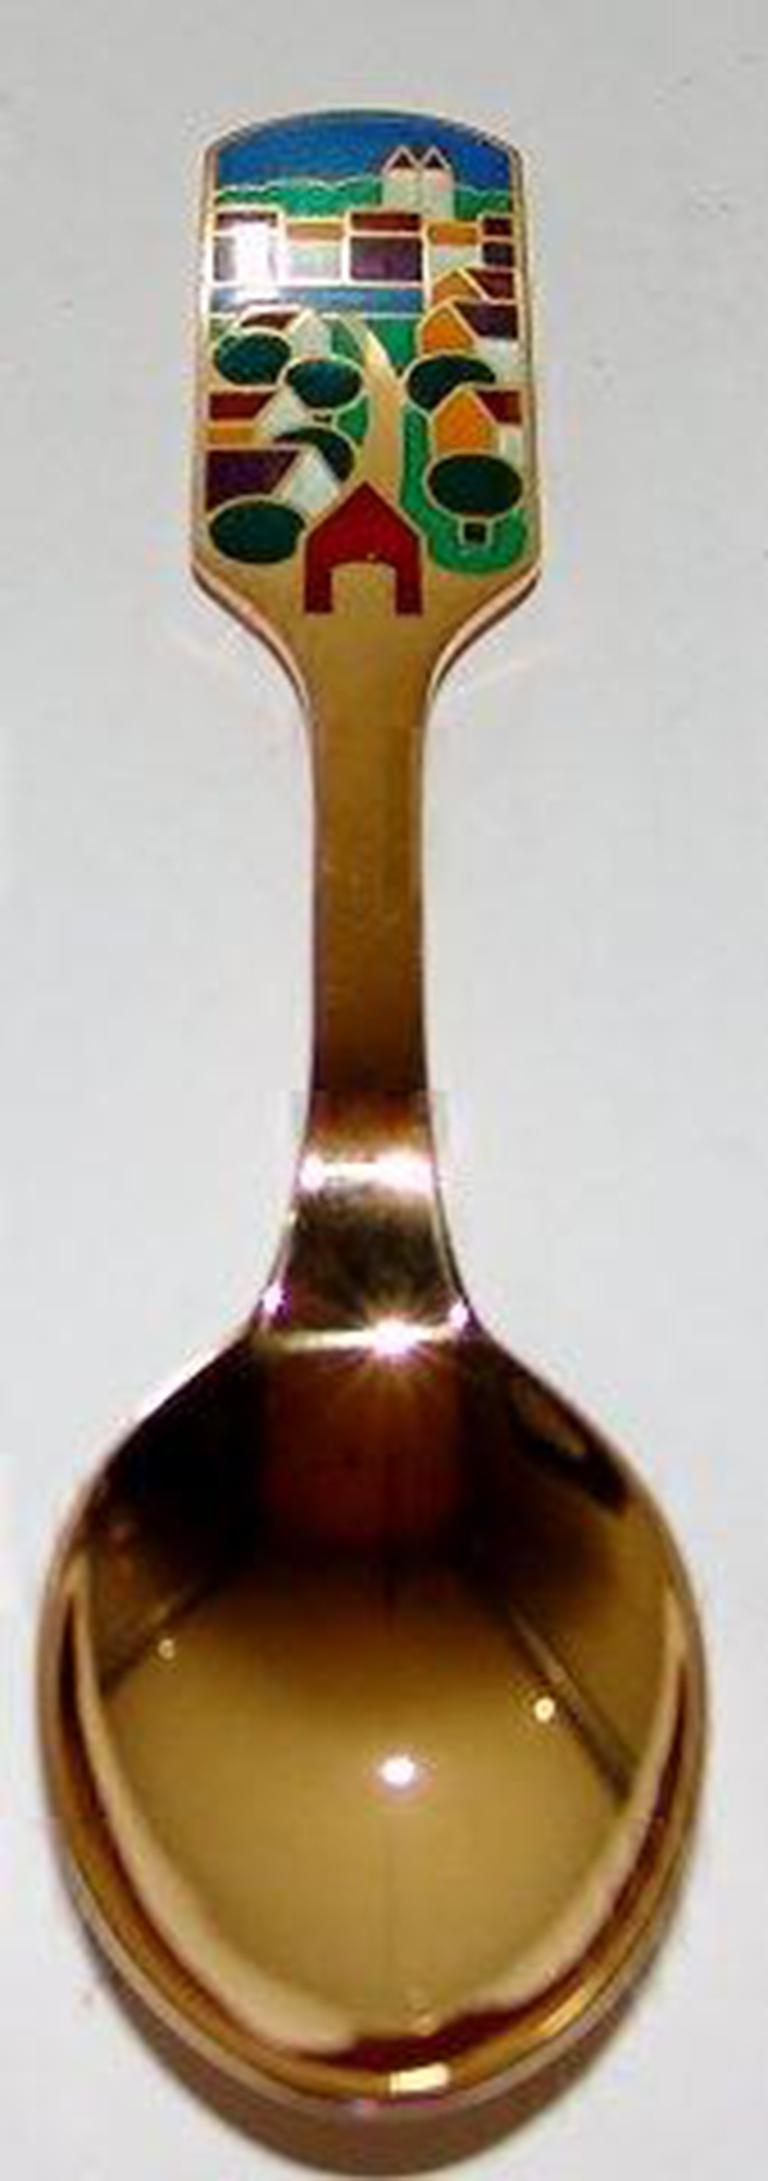 Anton michelsen Christmas spoon in sterling silver from 1988. In perfect condition.
 